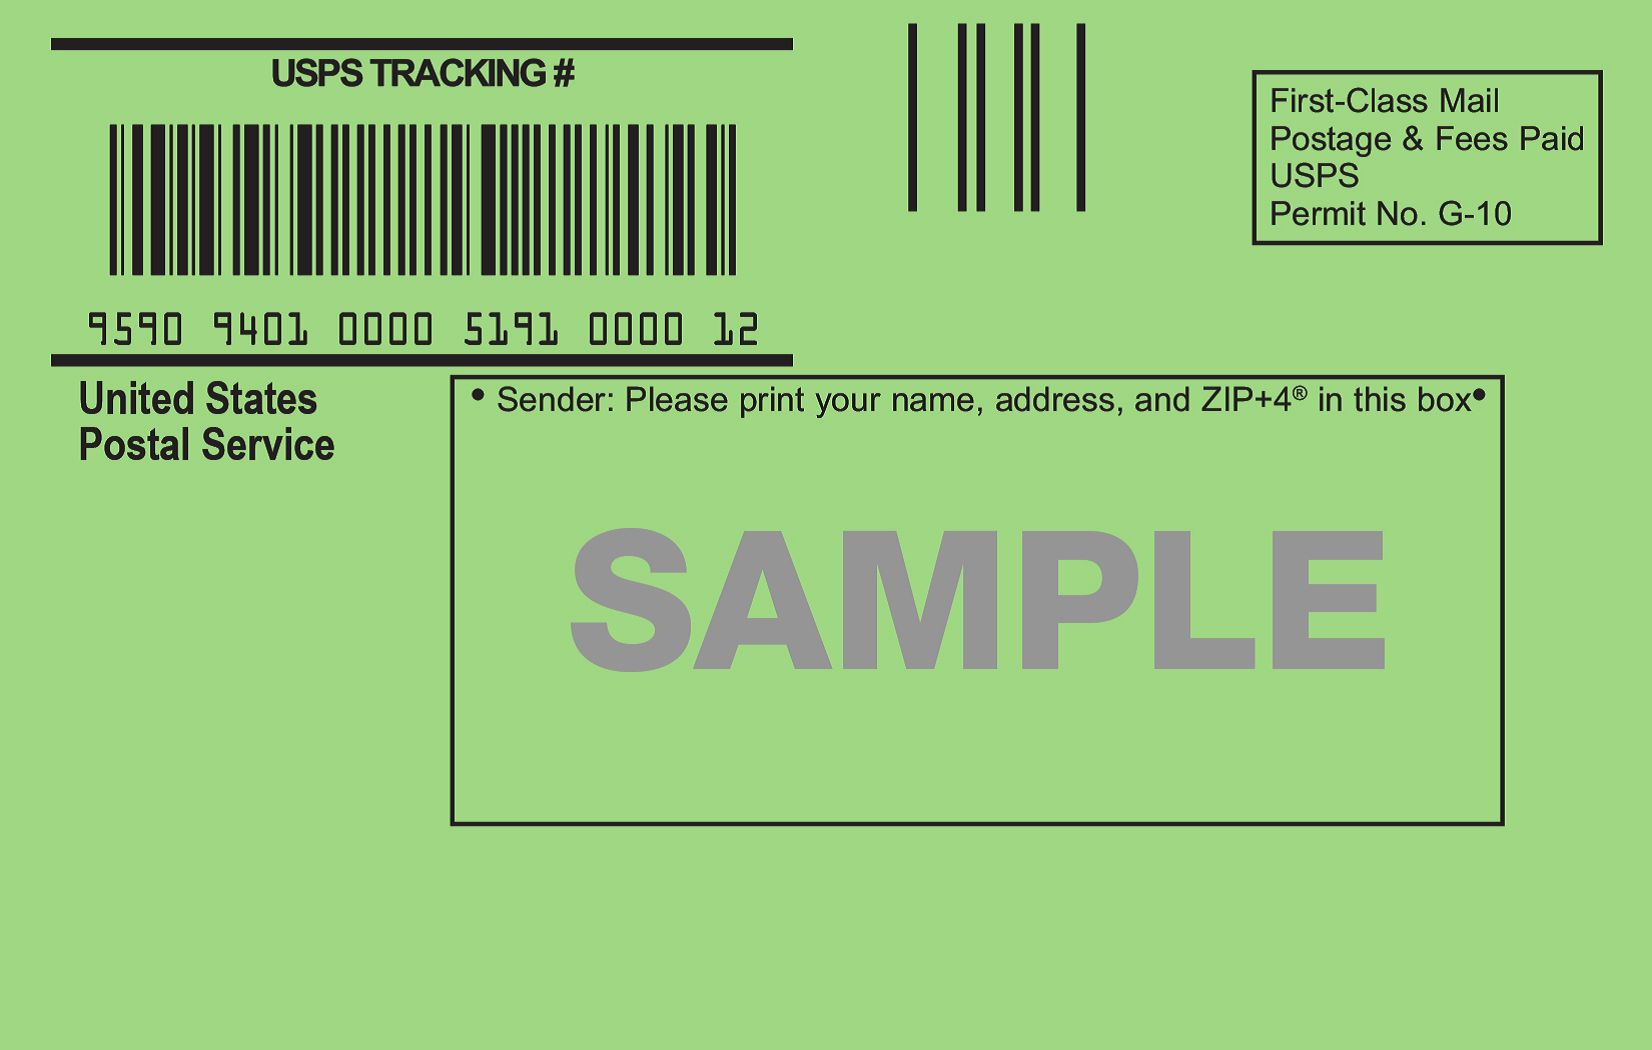 certified mail receipt tracking number